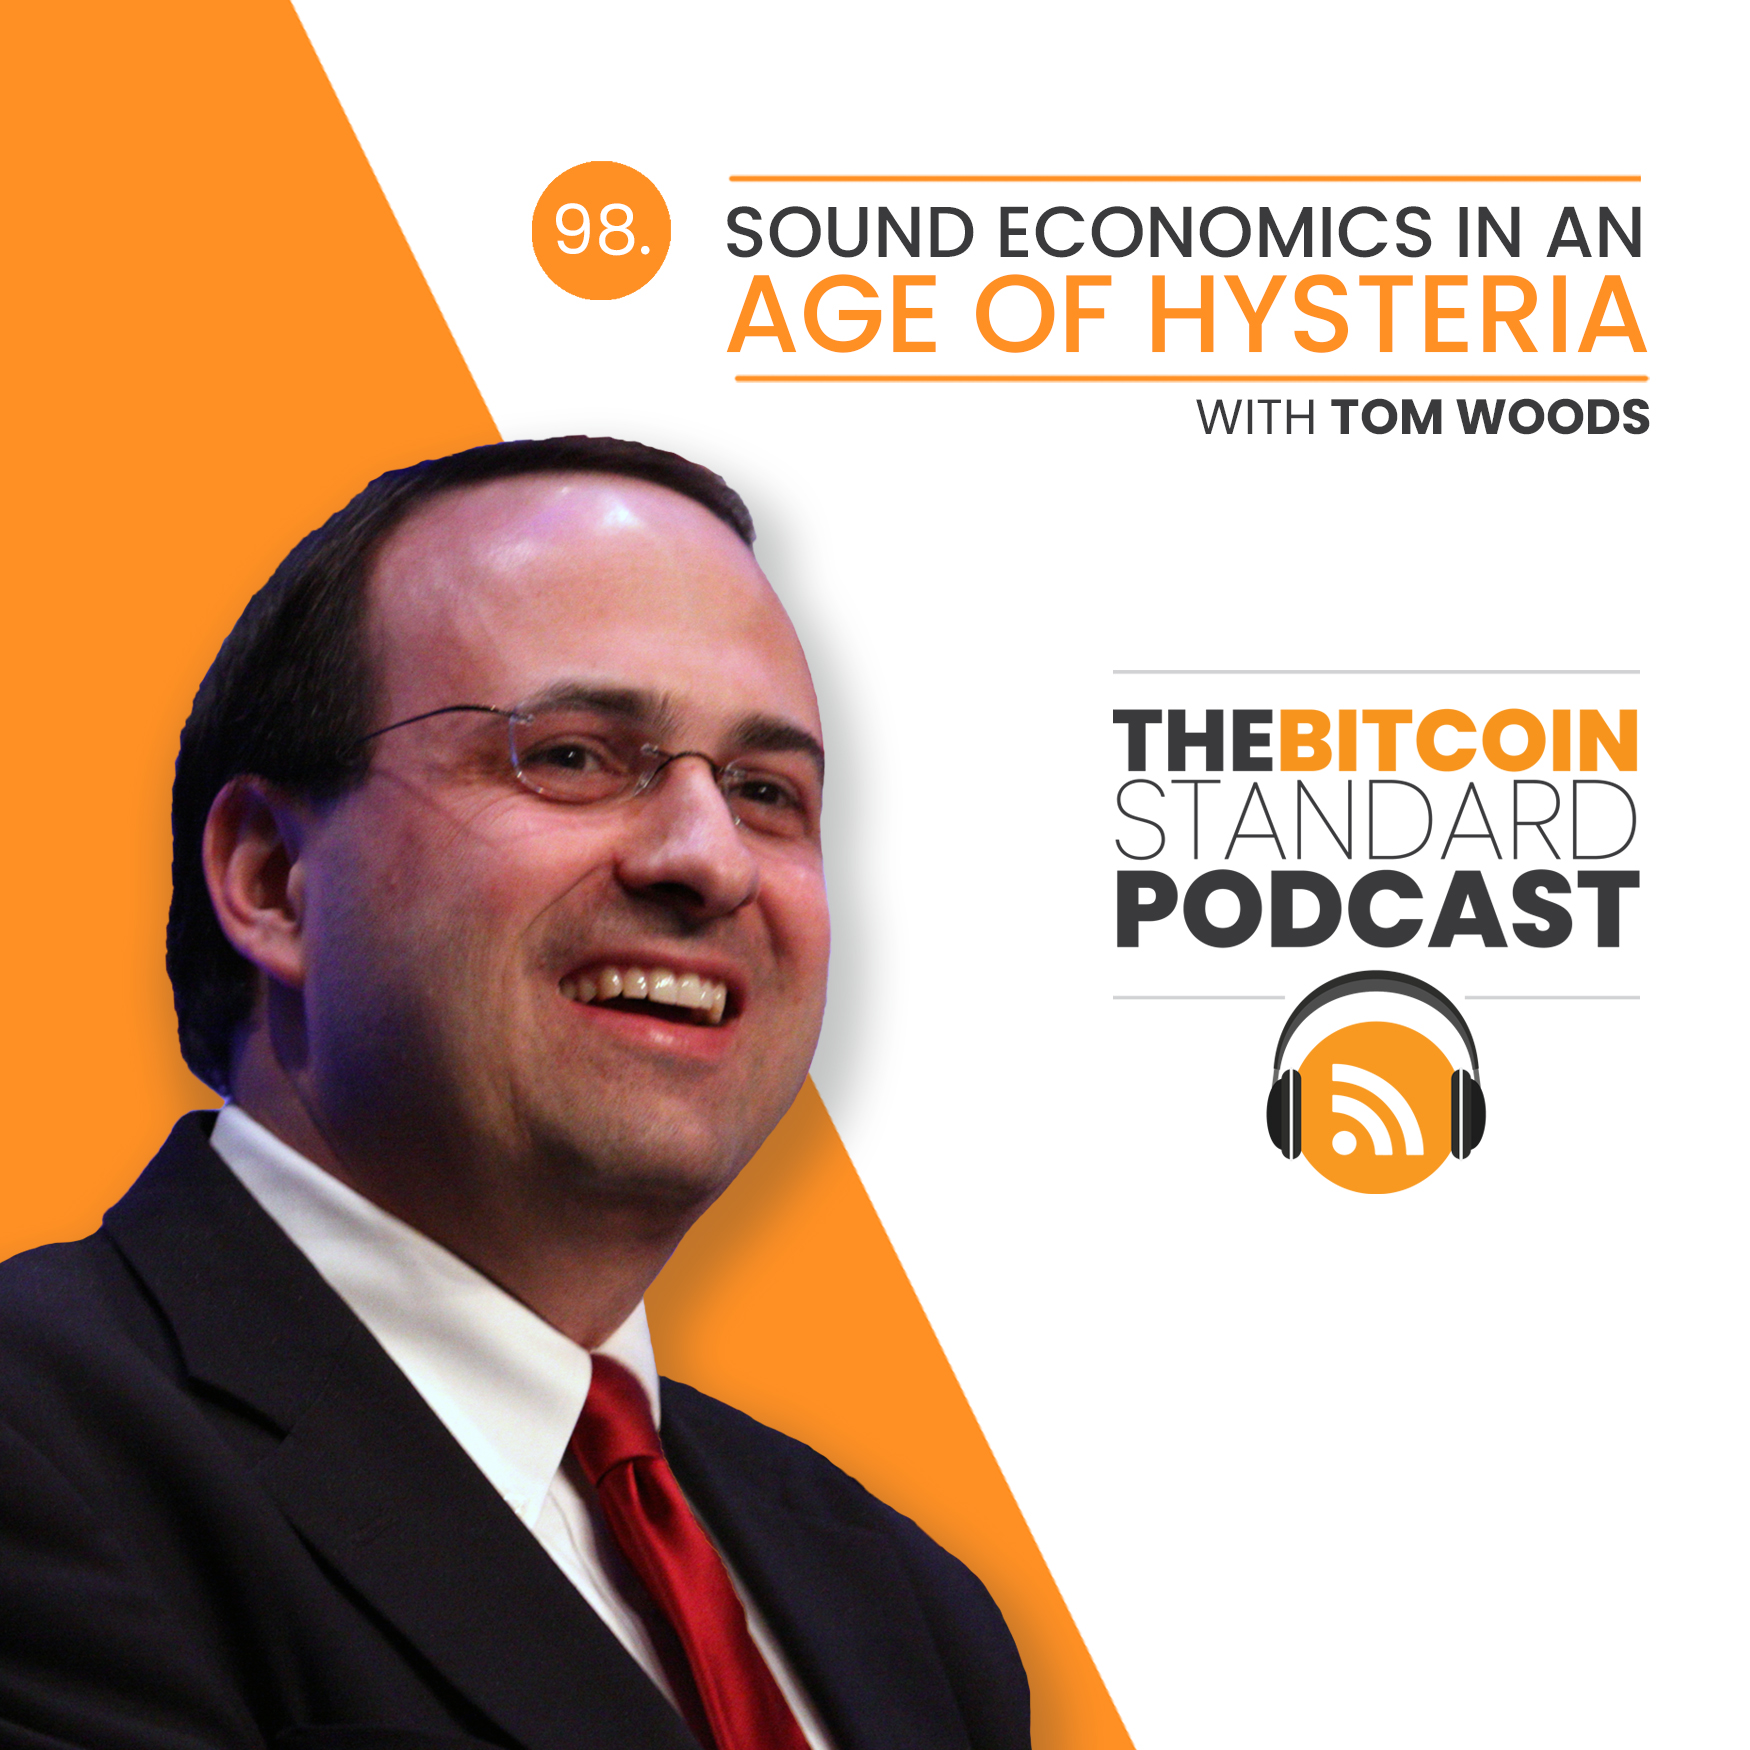 98. Sound economics in an age of hysteria with Tom Woods